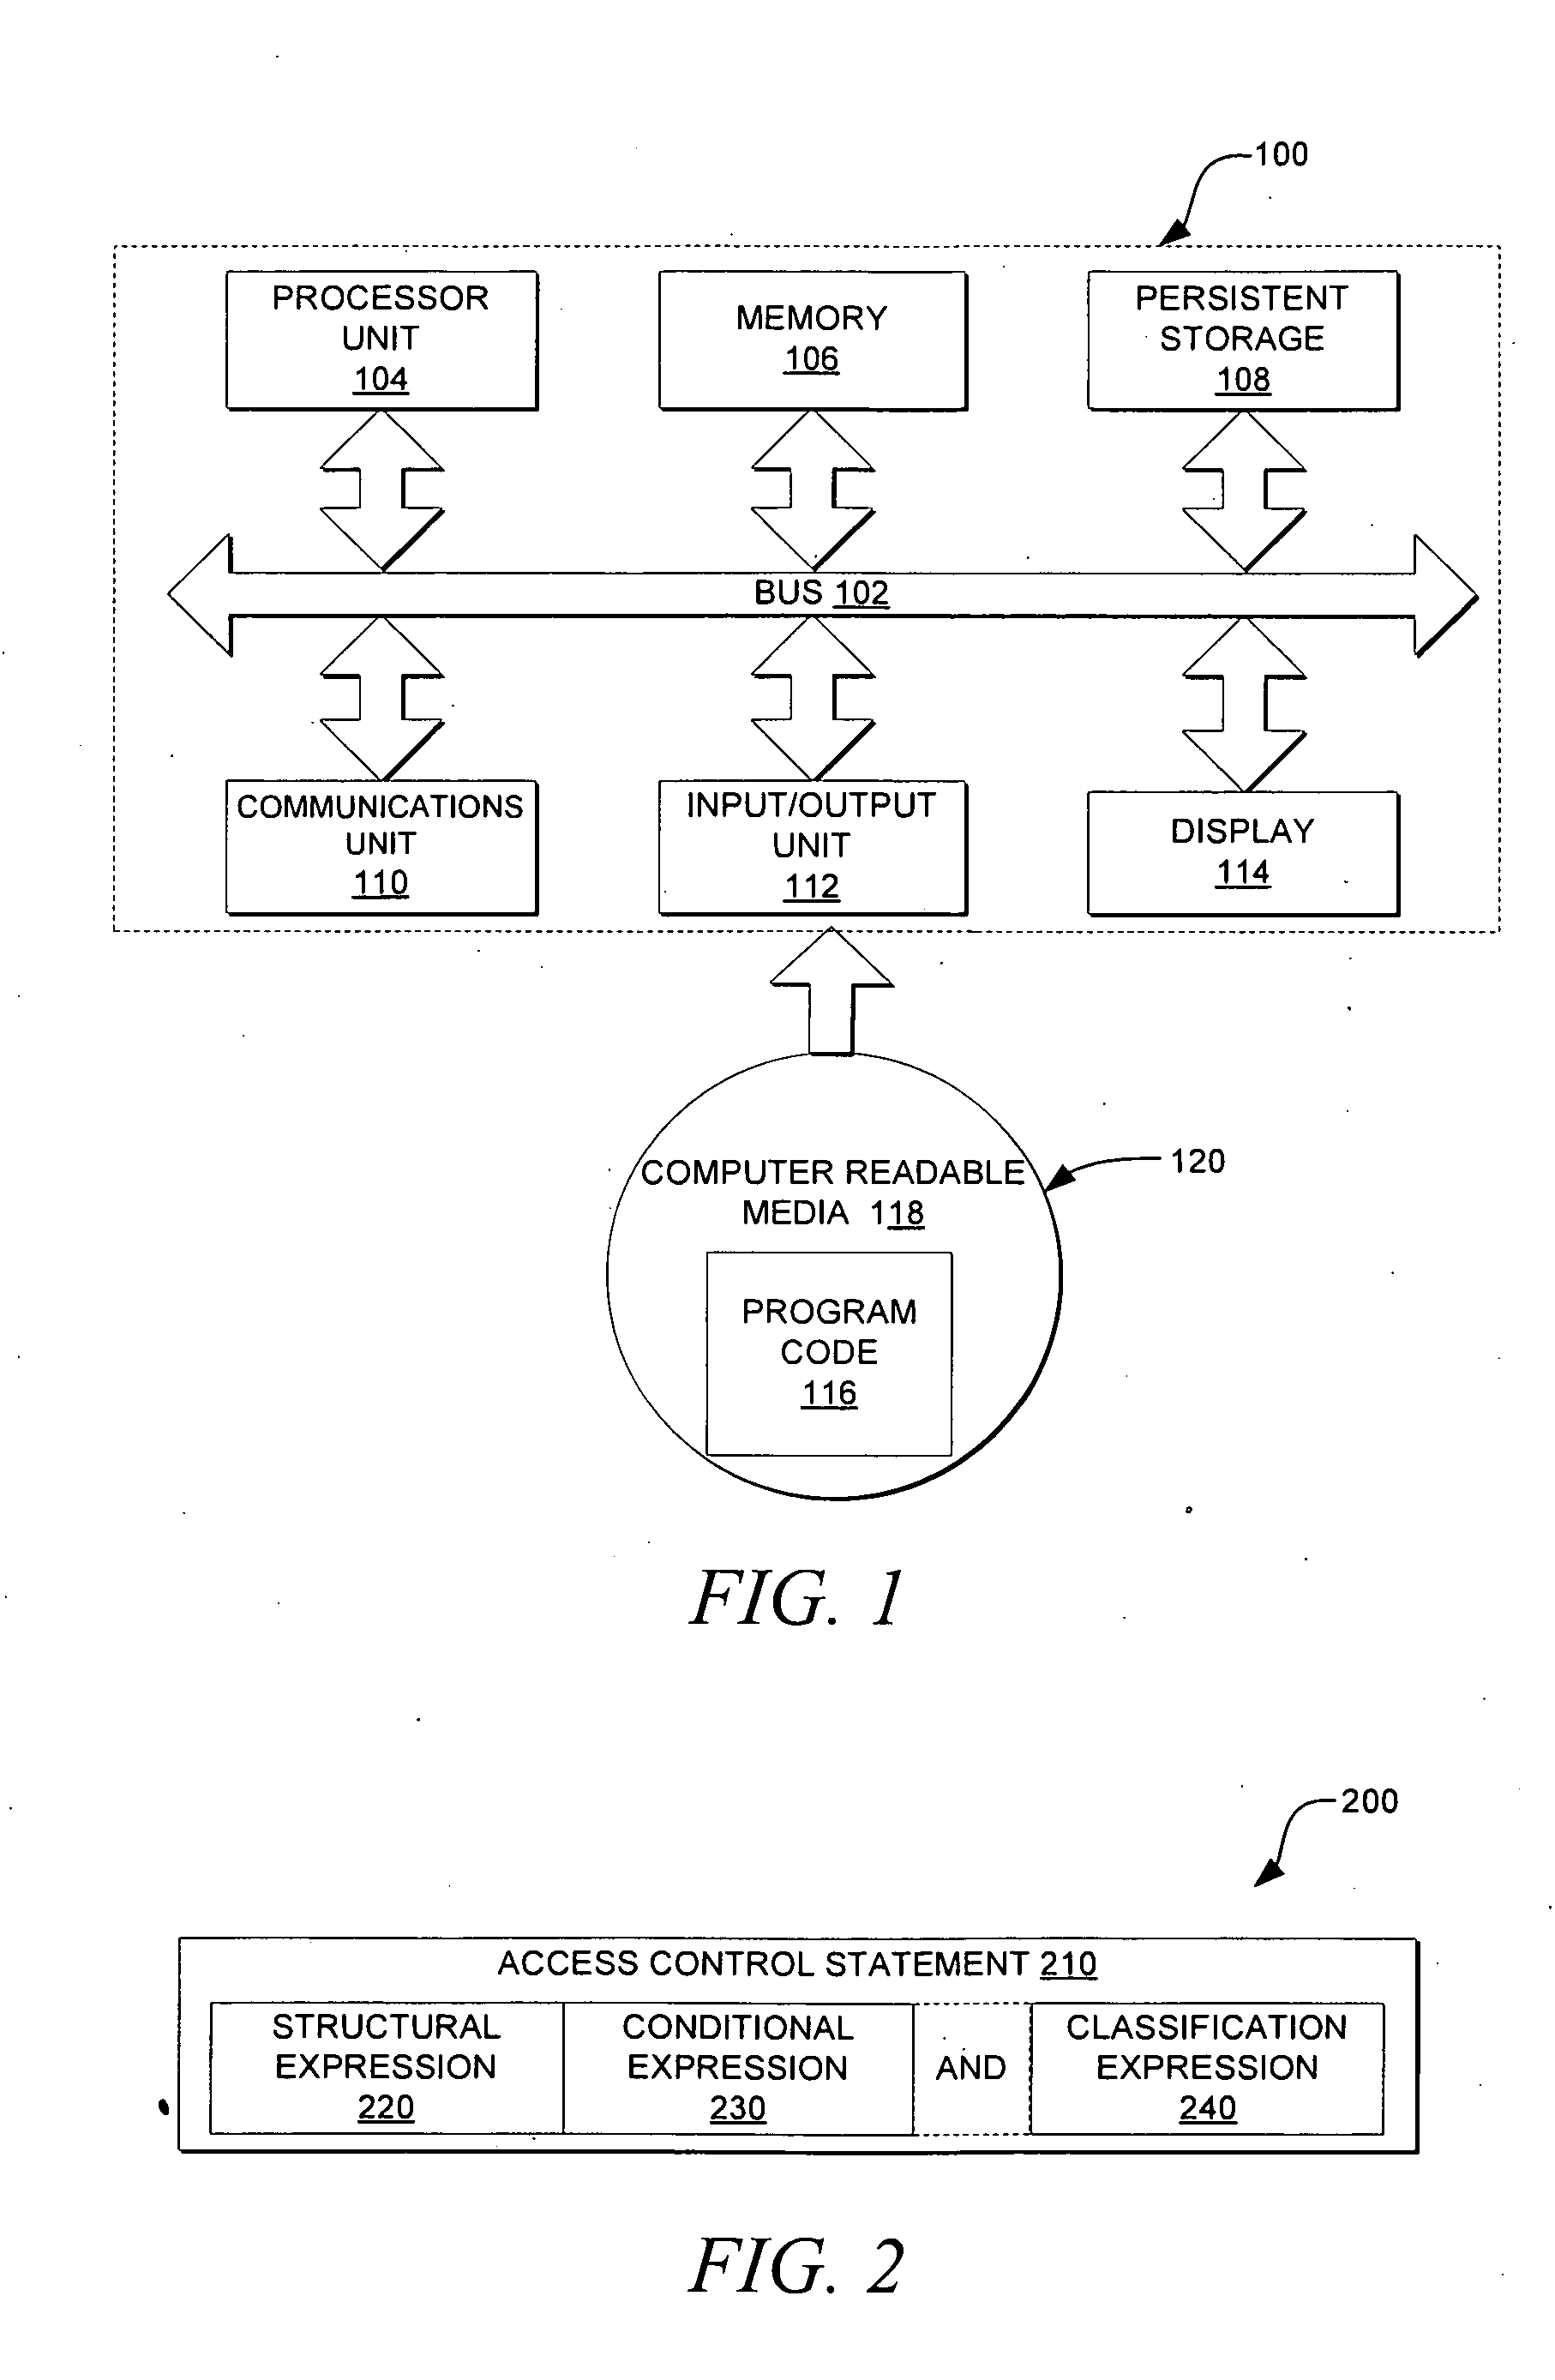 Method of using xpath and ontology engine in authorization control of assets and resources